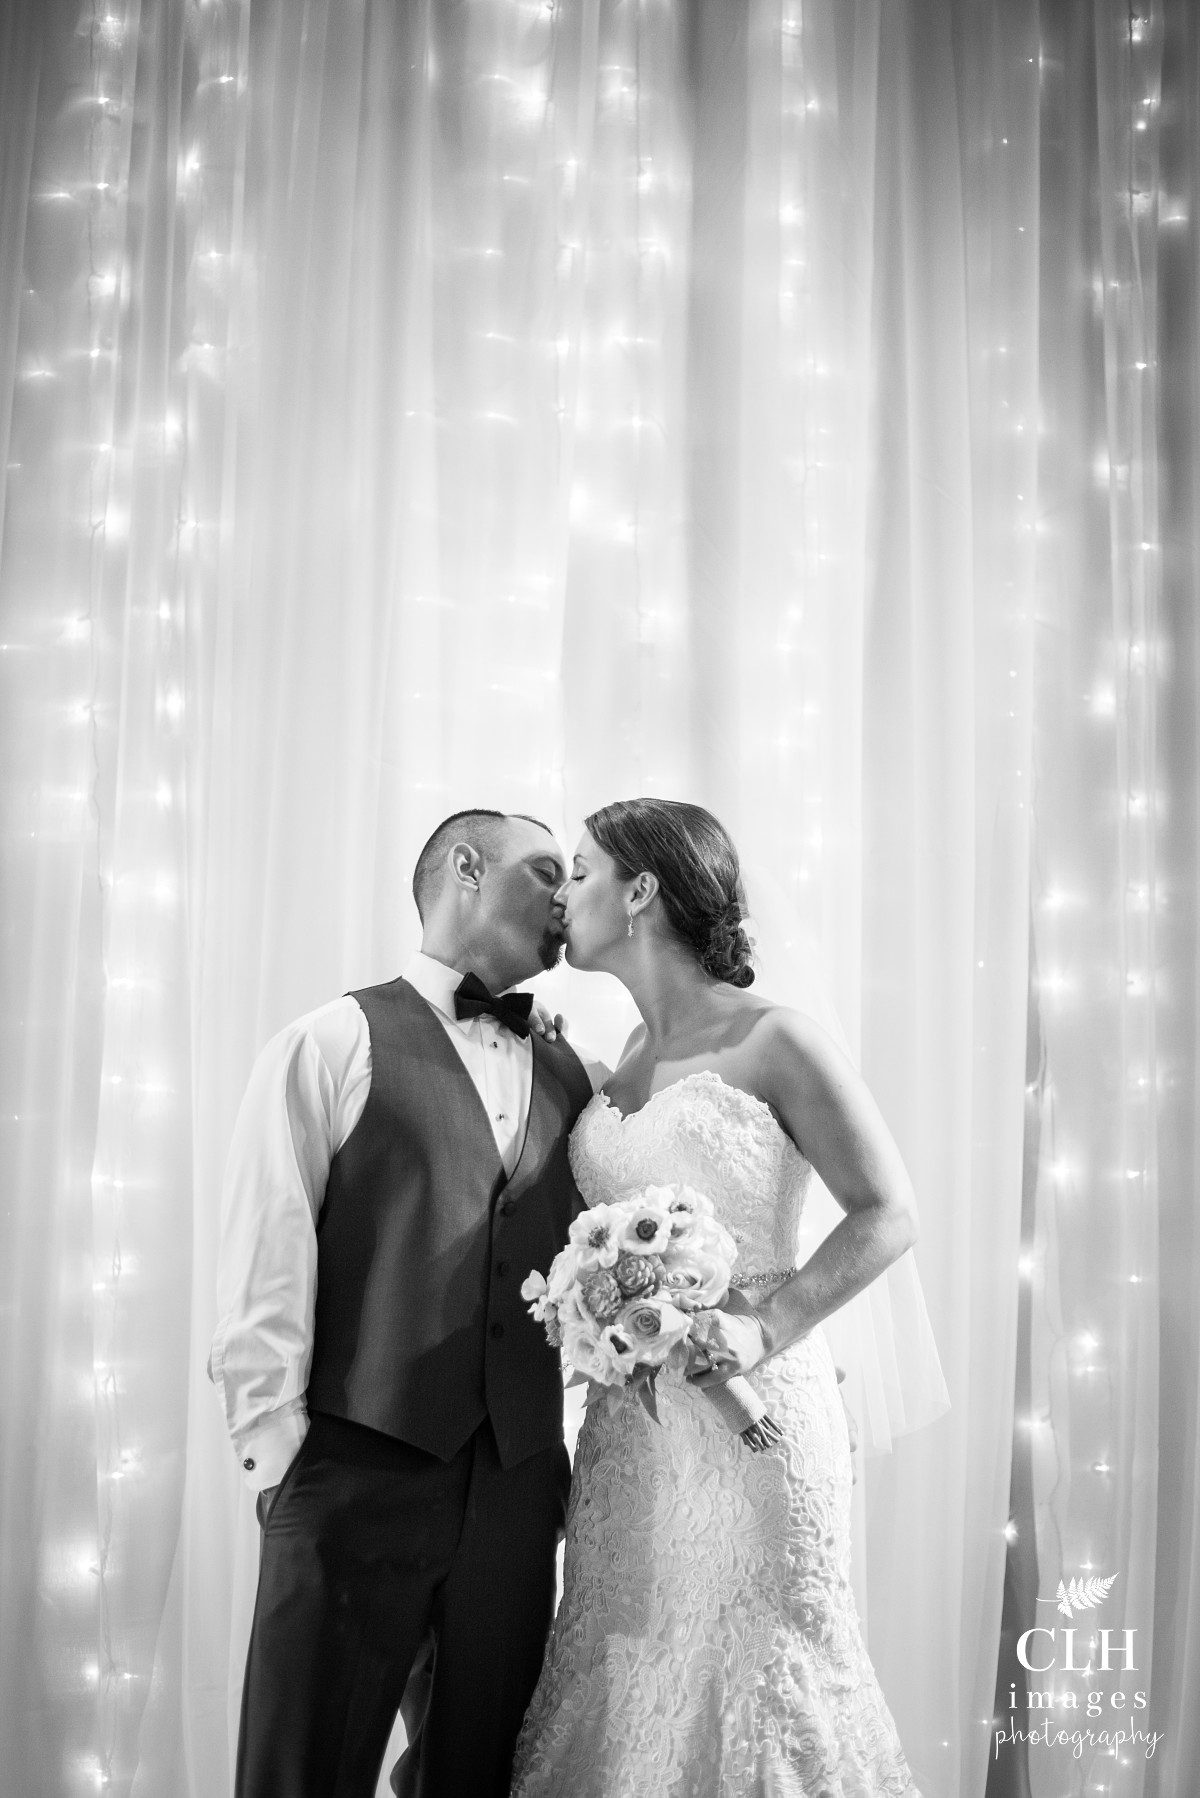 clh-images-photography-ashley-and-rob-day-wedding-revolution-hall-wedding-troy-ny-wedding-photography-151